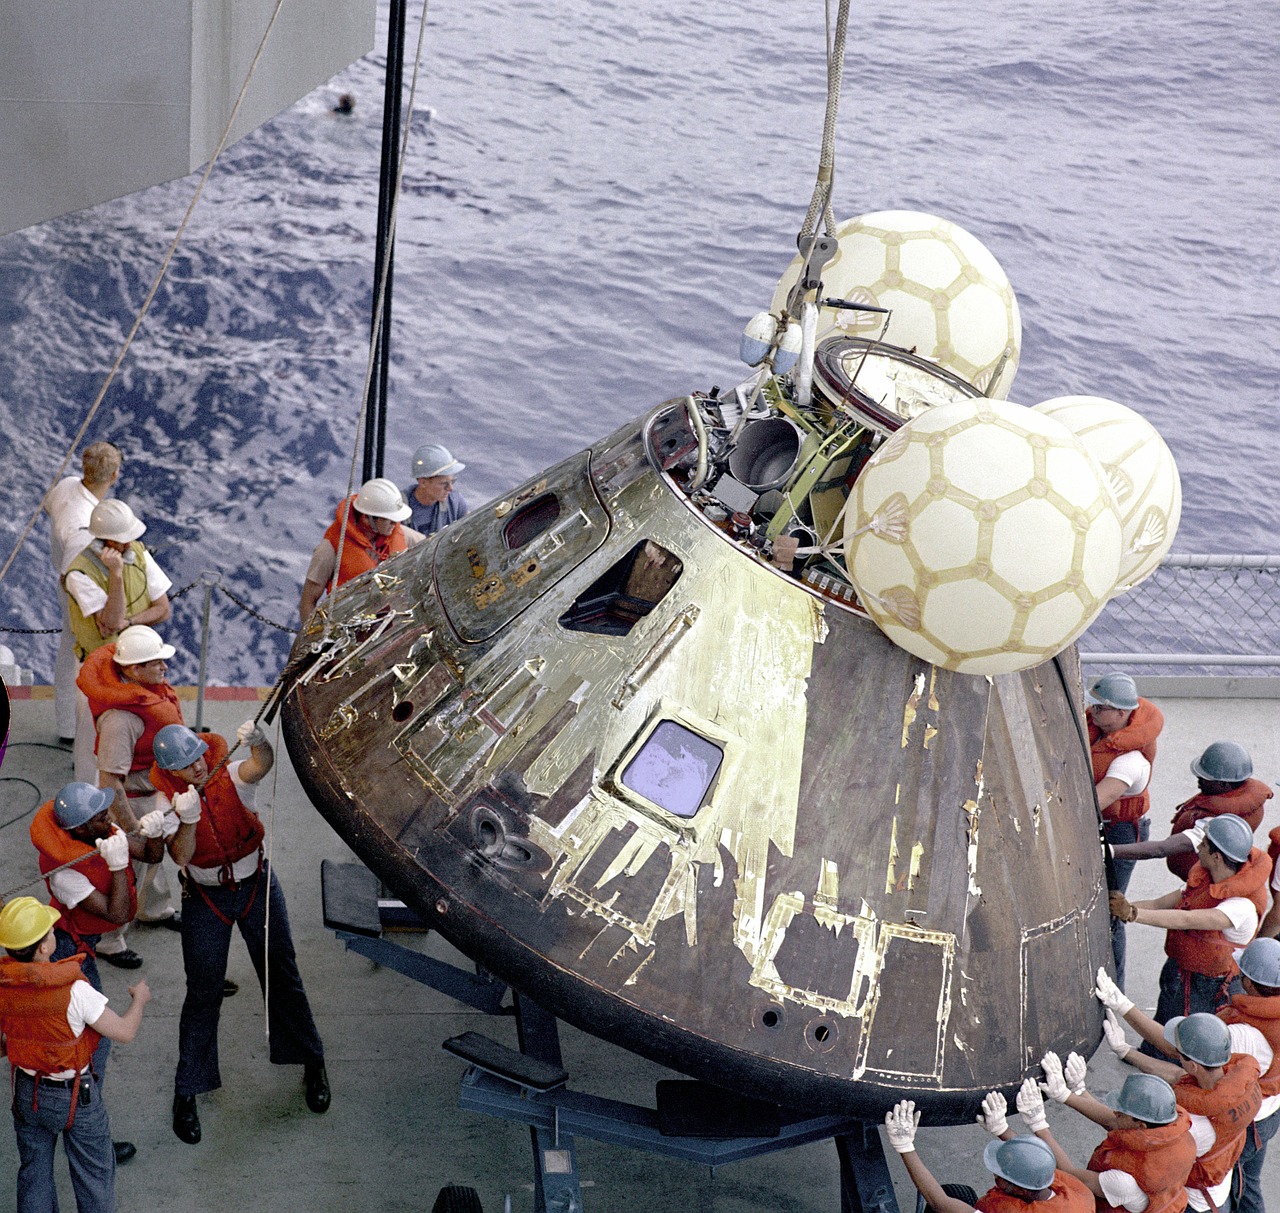 Ship's crew moving an Apollo capsule out of the water to the ship's deck